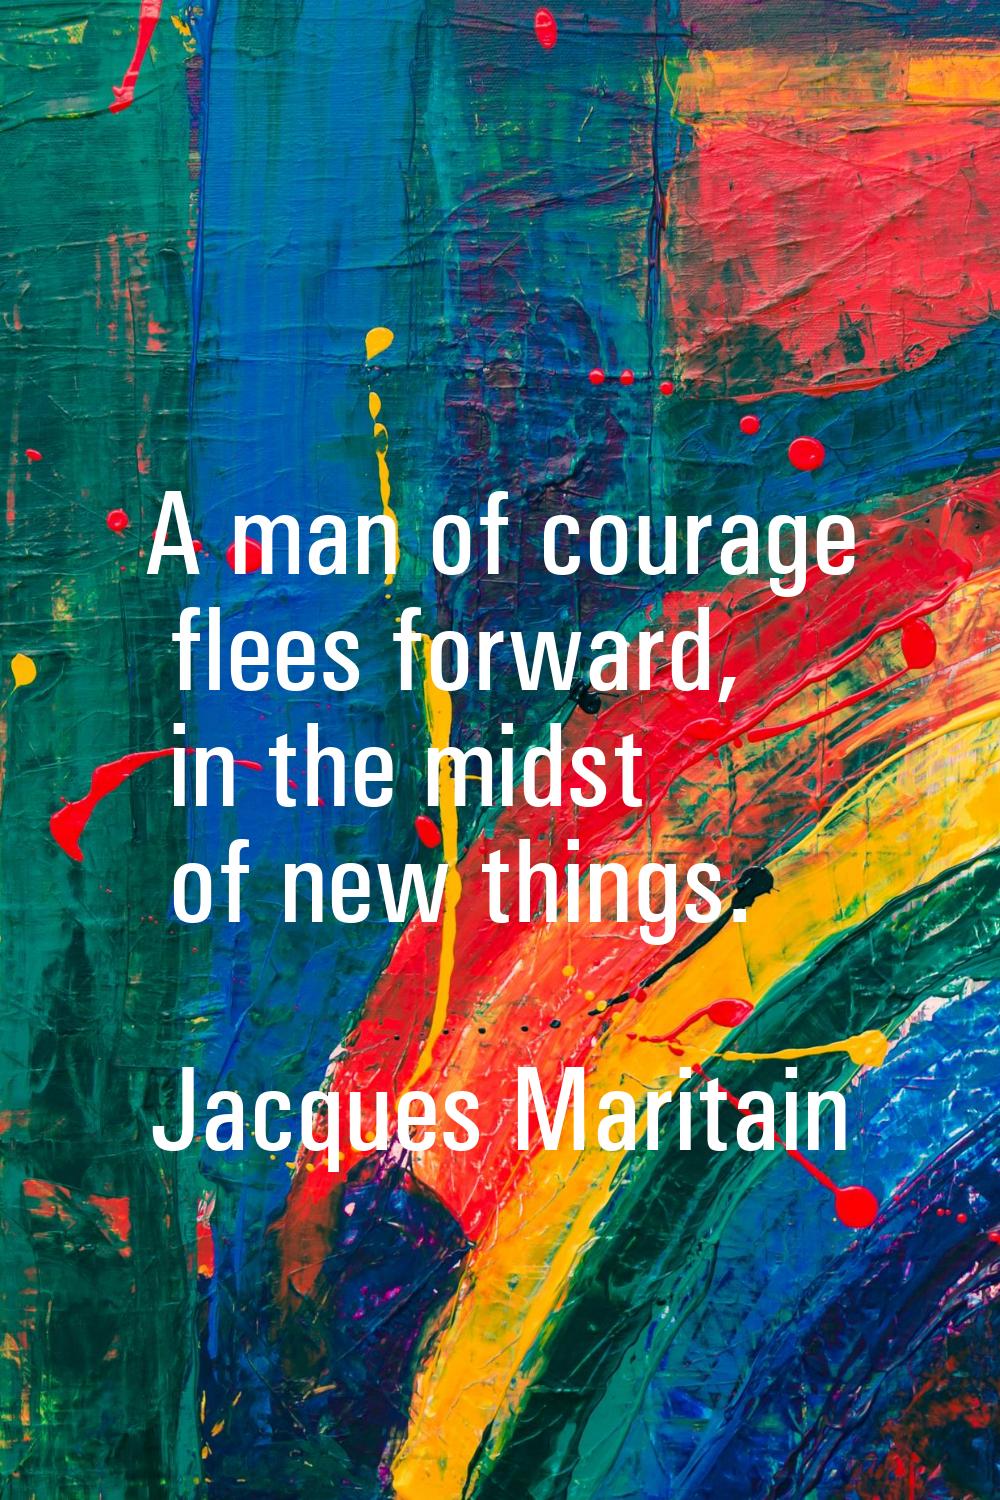 A man of courage flees forward, in the midst of new things.